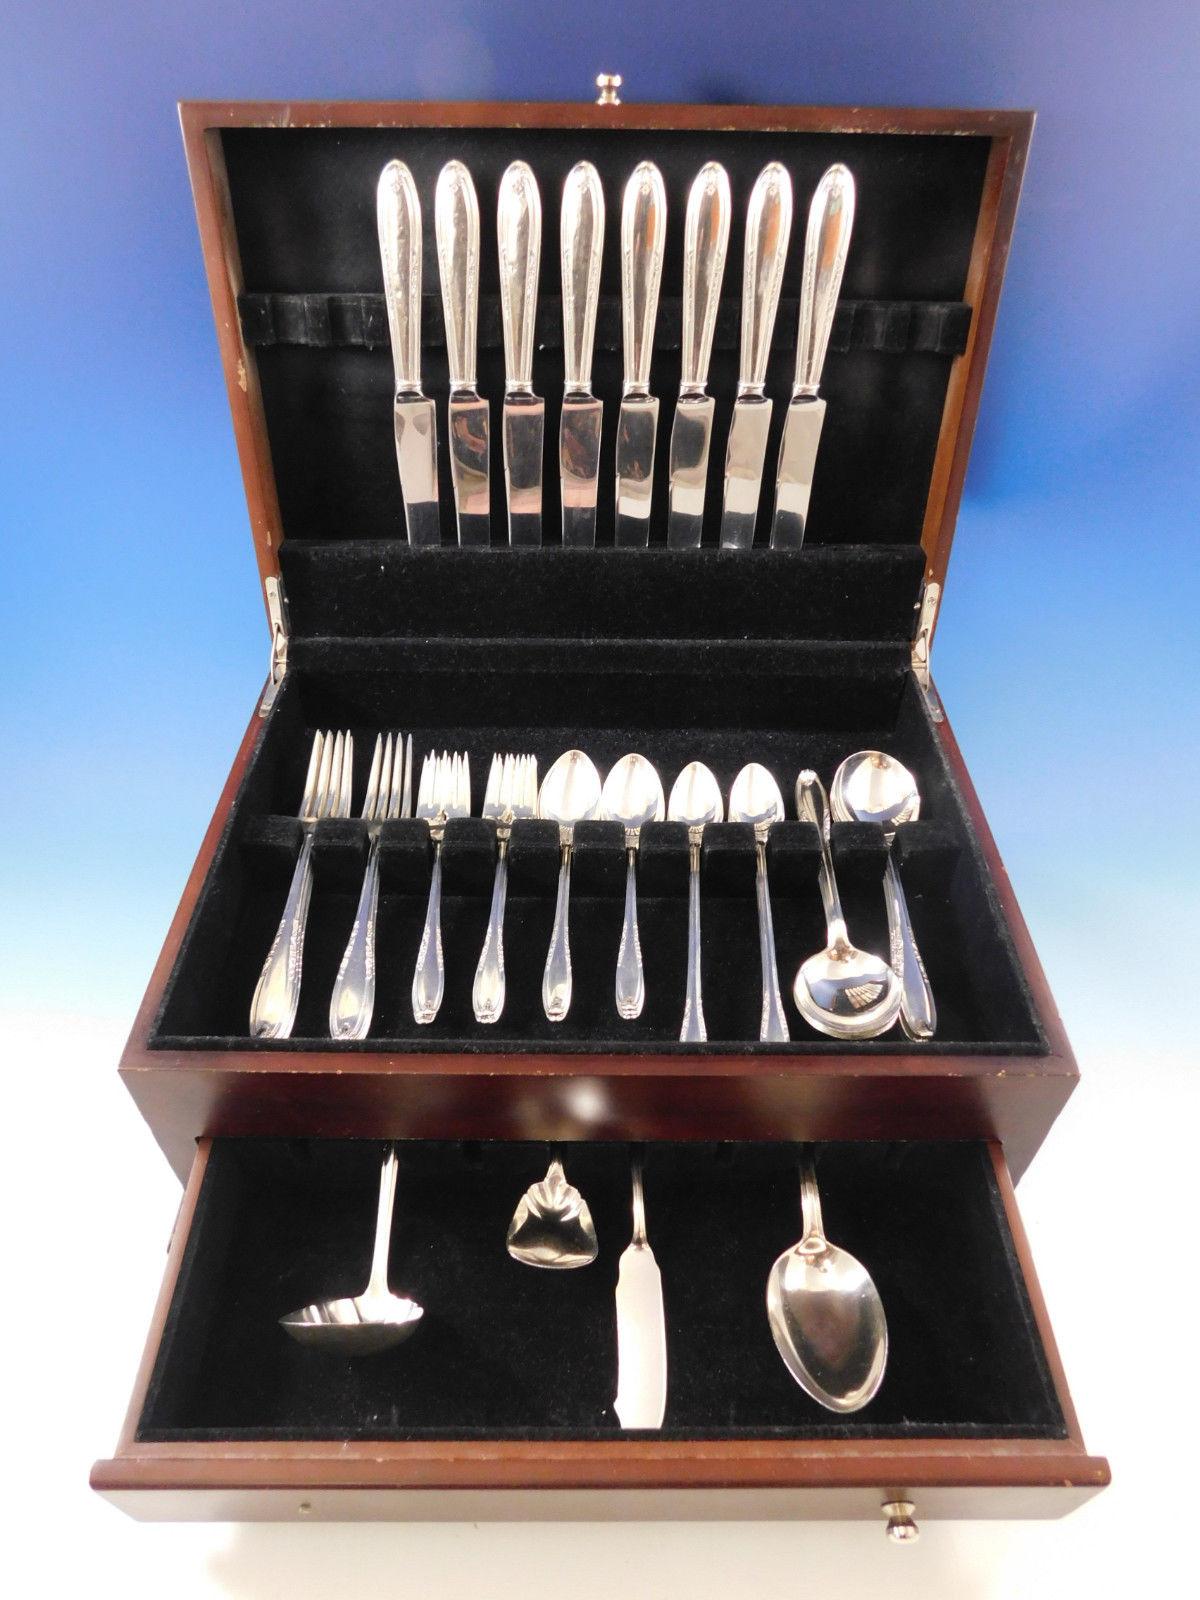 Dinner size Leonore by Manchester sterling silver flatware set - 52 pieces. This set includes:

Eight dinner size knives, 9 5/8